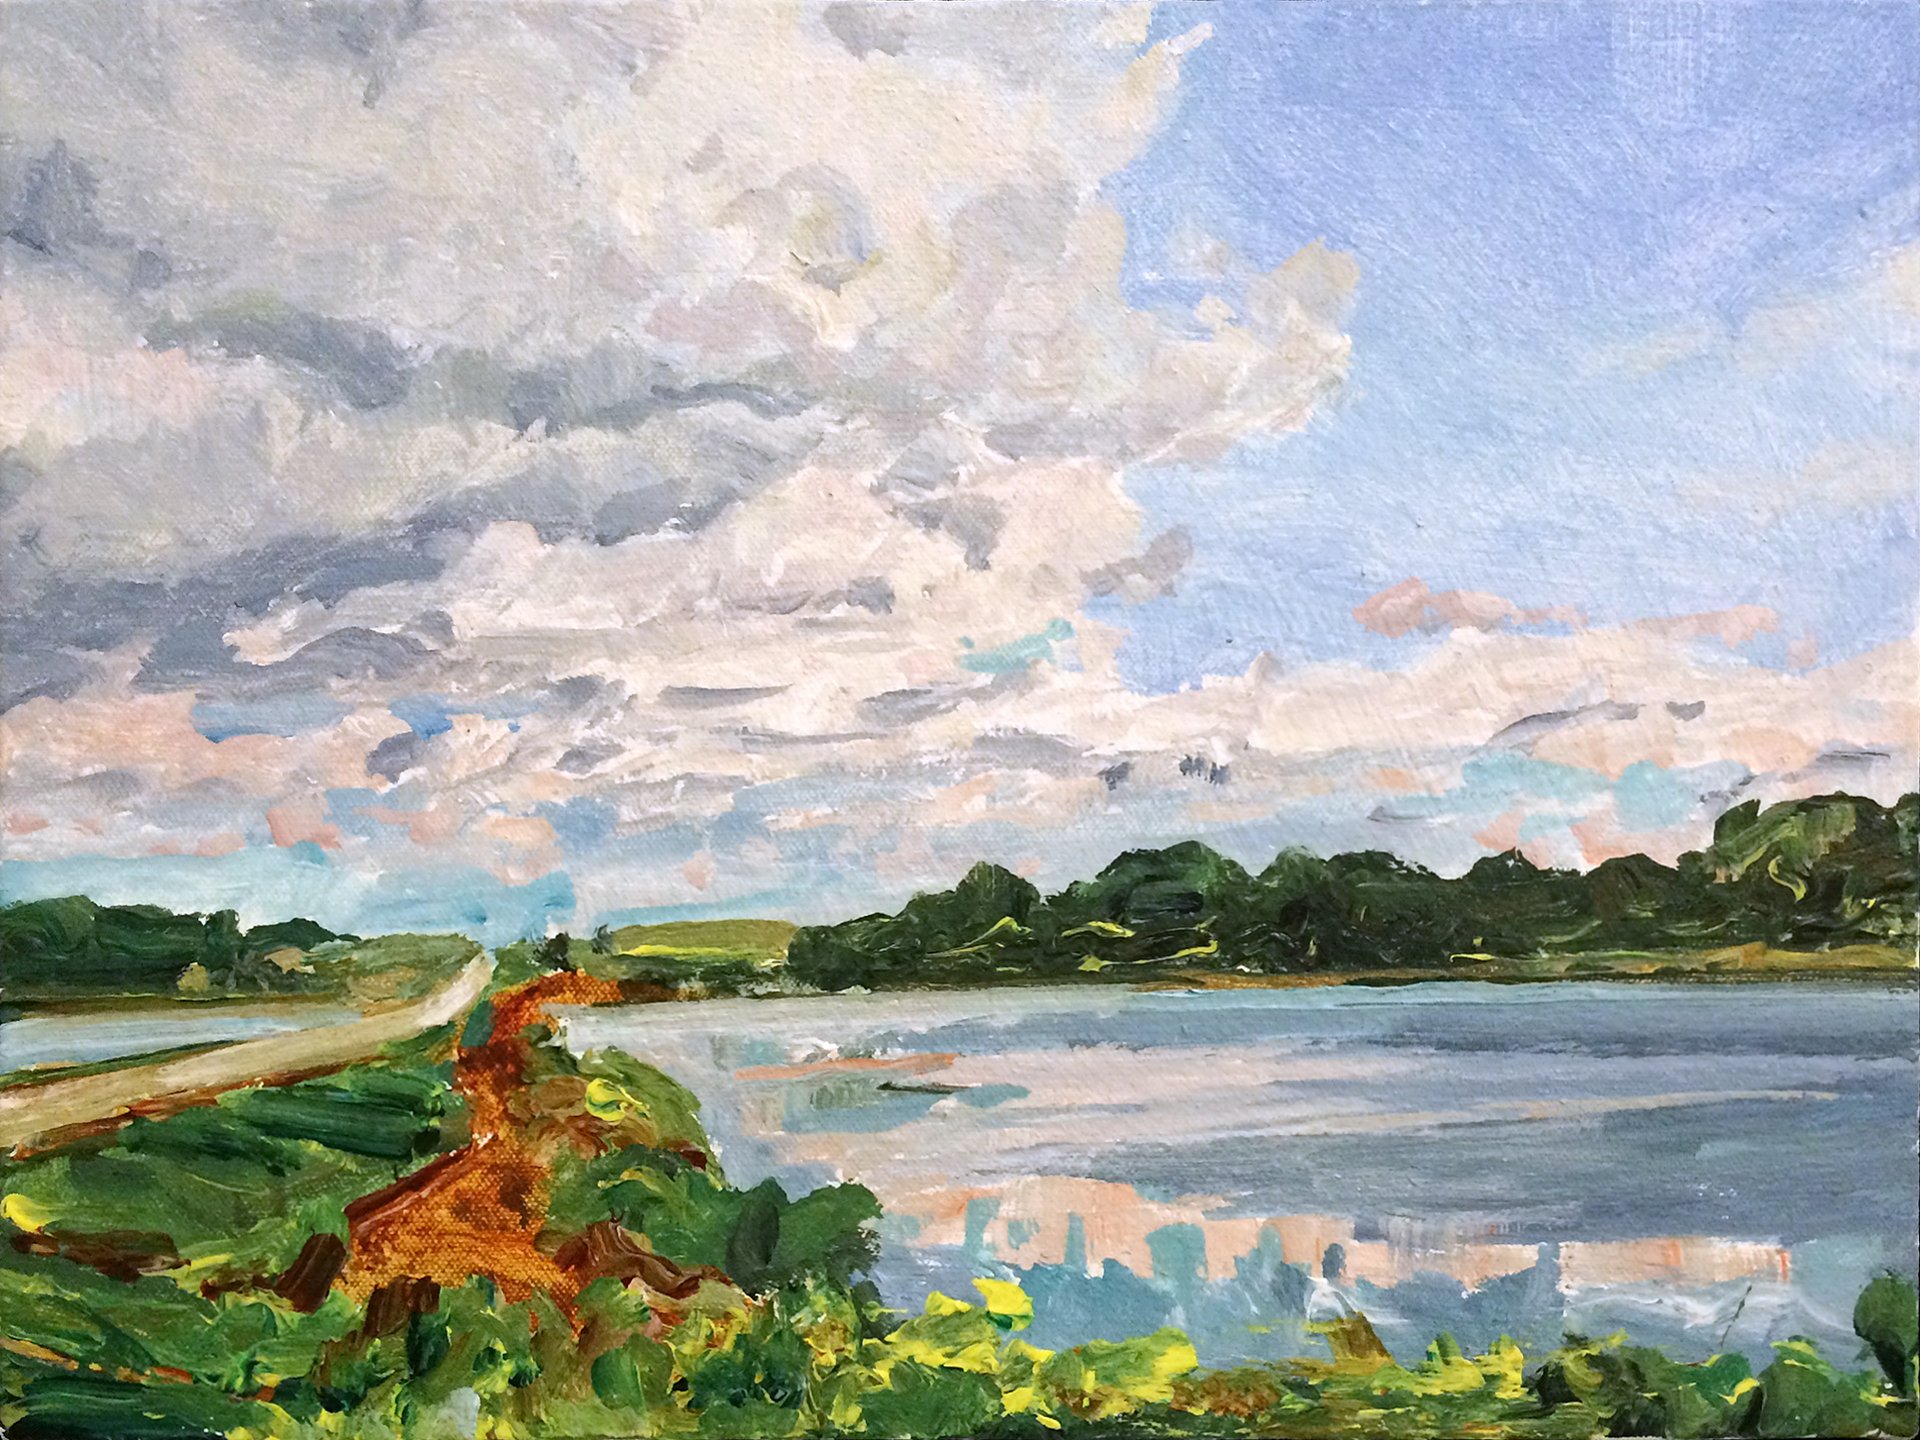 A Road Through the Slough, 1994, 9 x 12 in., acrylic on canvas 